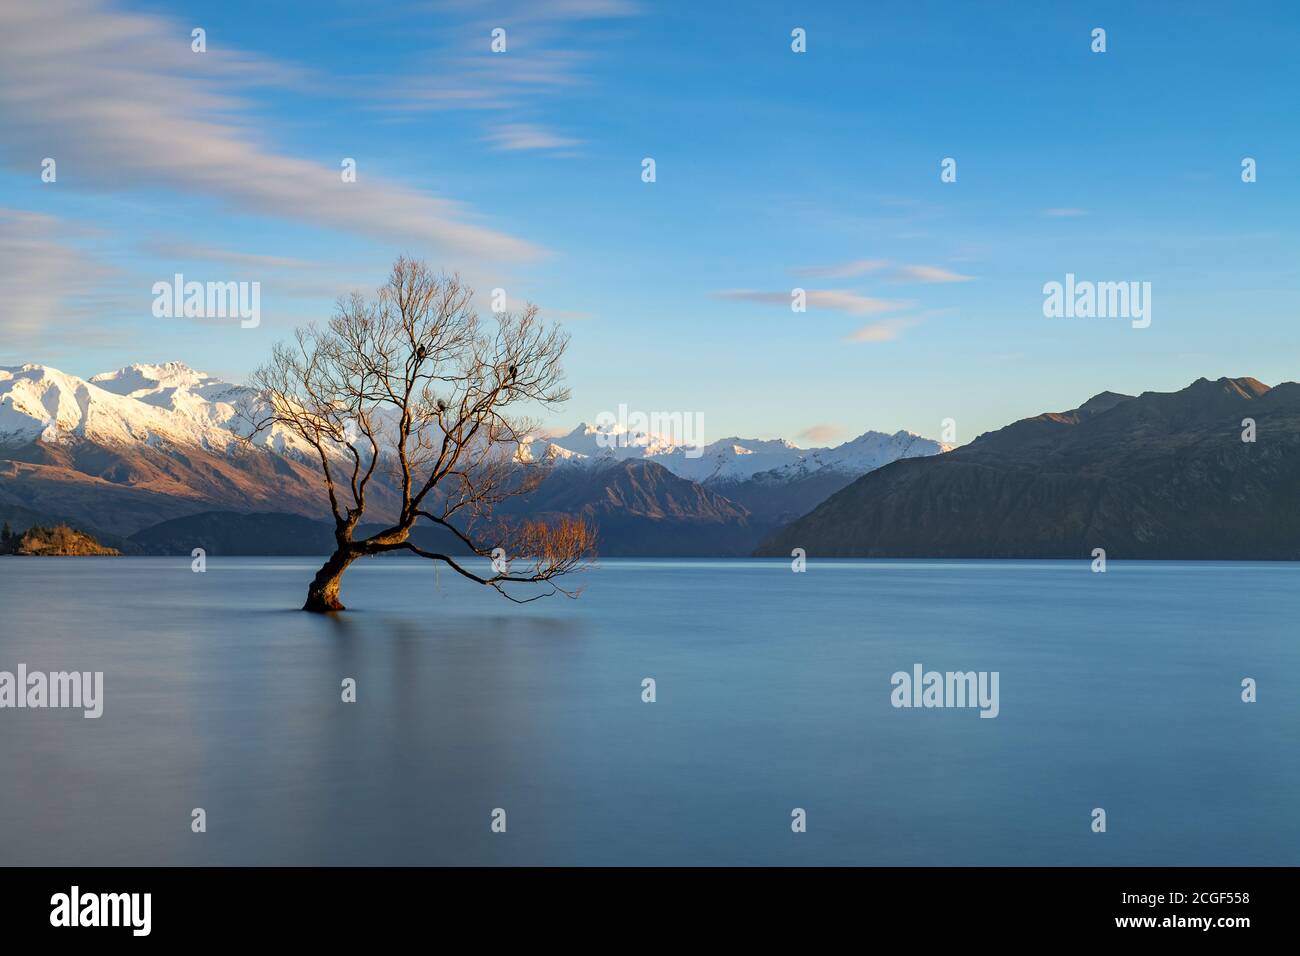 Wanaka trees in the morning water in the background is a mountain with snowy peaks. Blue skies with beautiful clouds at Glendhu Bay, Otago, New Zealan Stock Photo